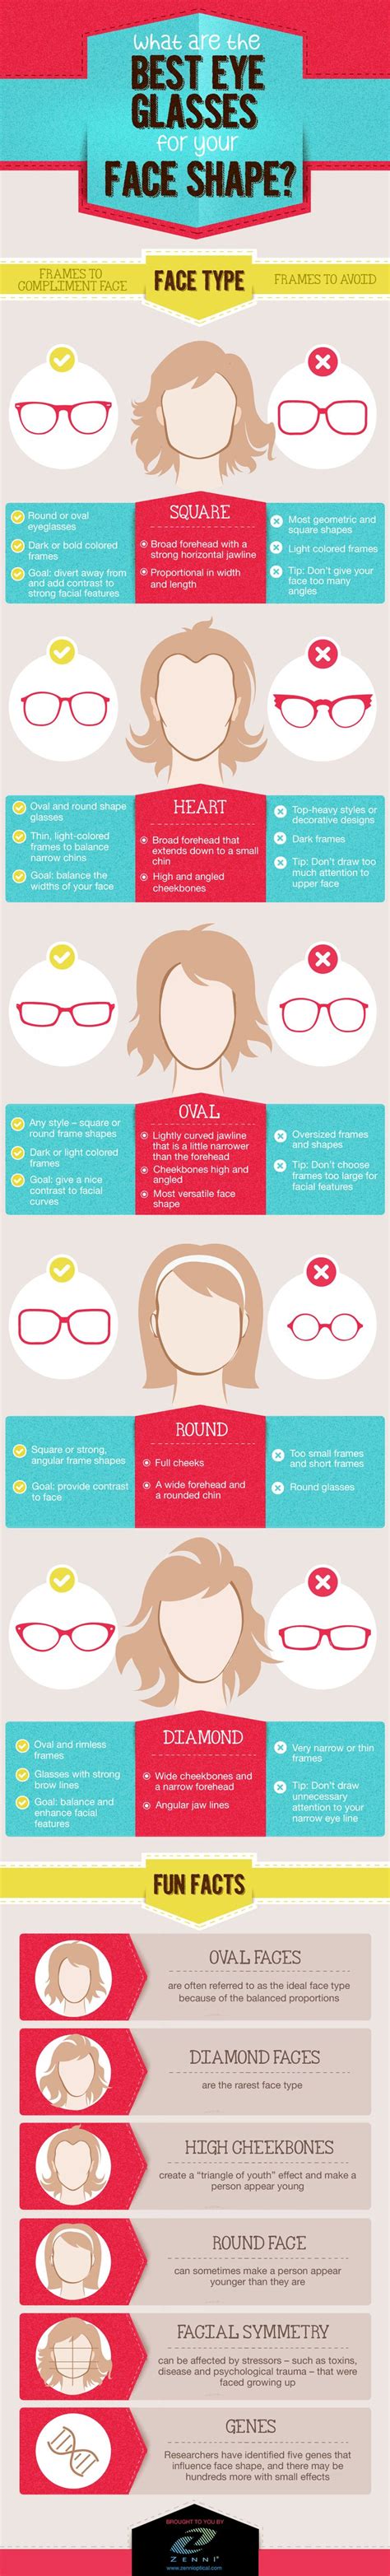 best eyeglasses for your face shape infographic zenni optical